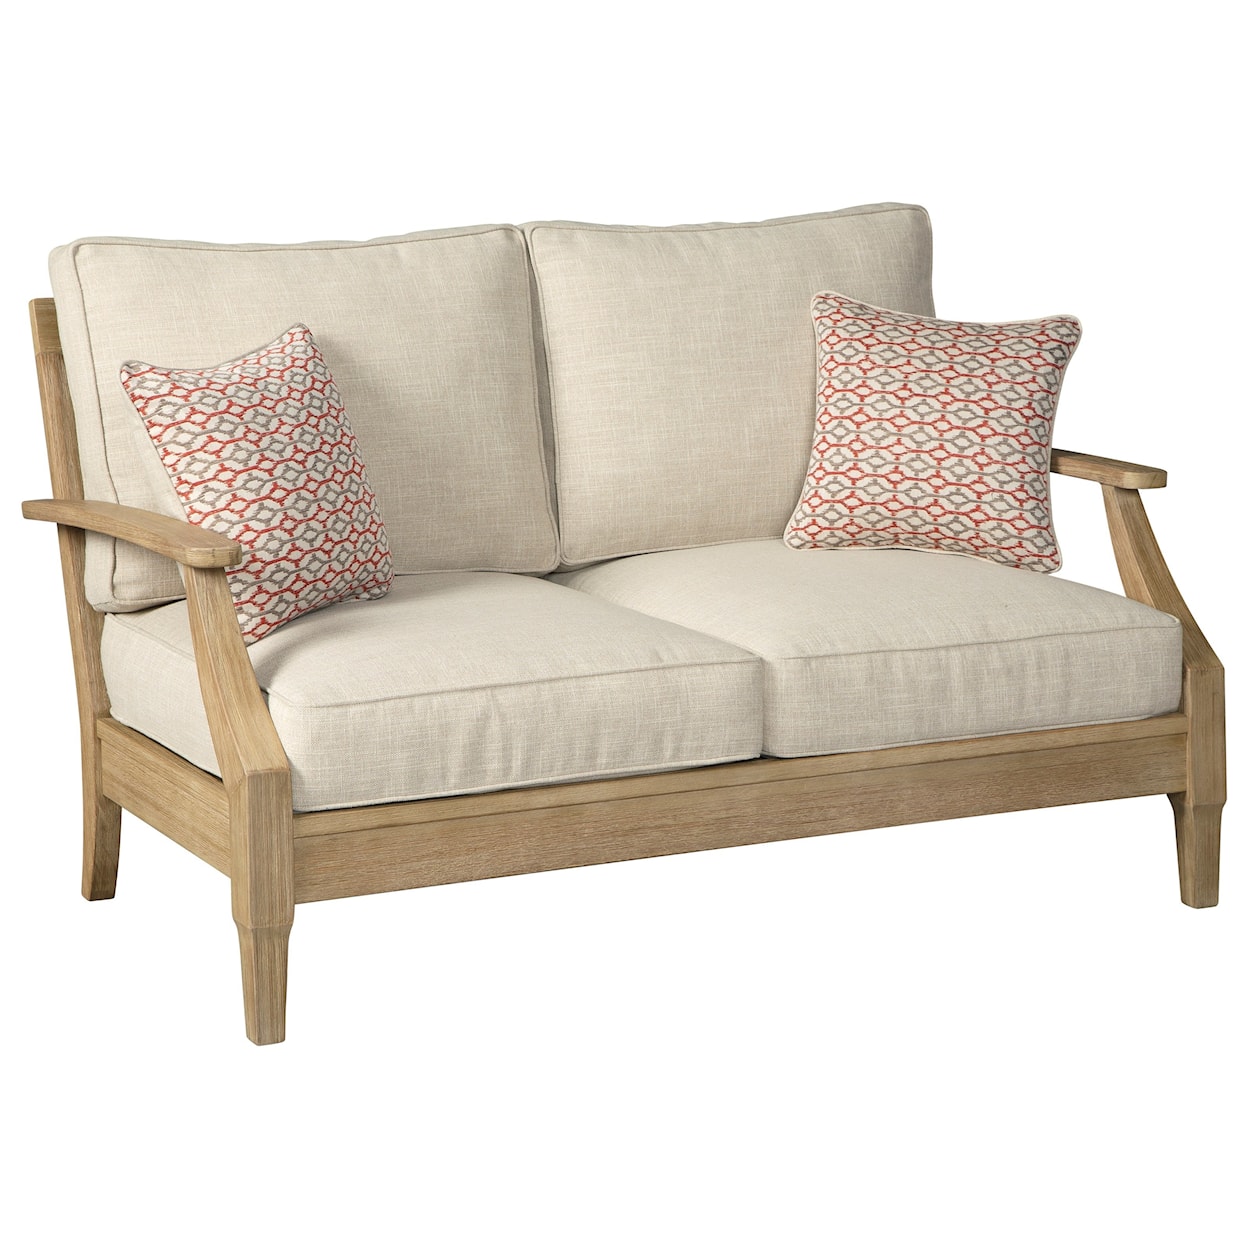 Signature Design by Ashley Clare View Loveseat w/ Cushion